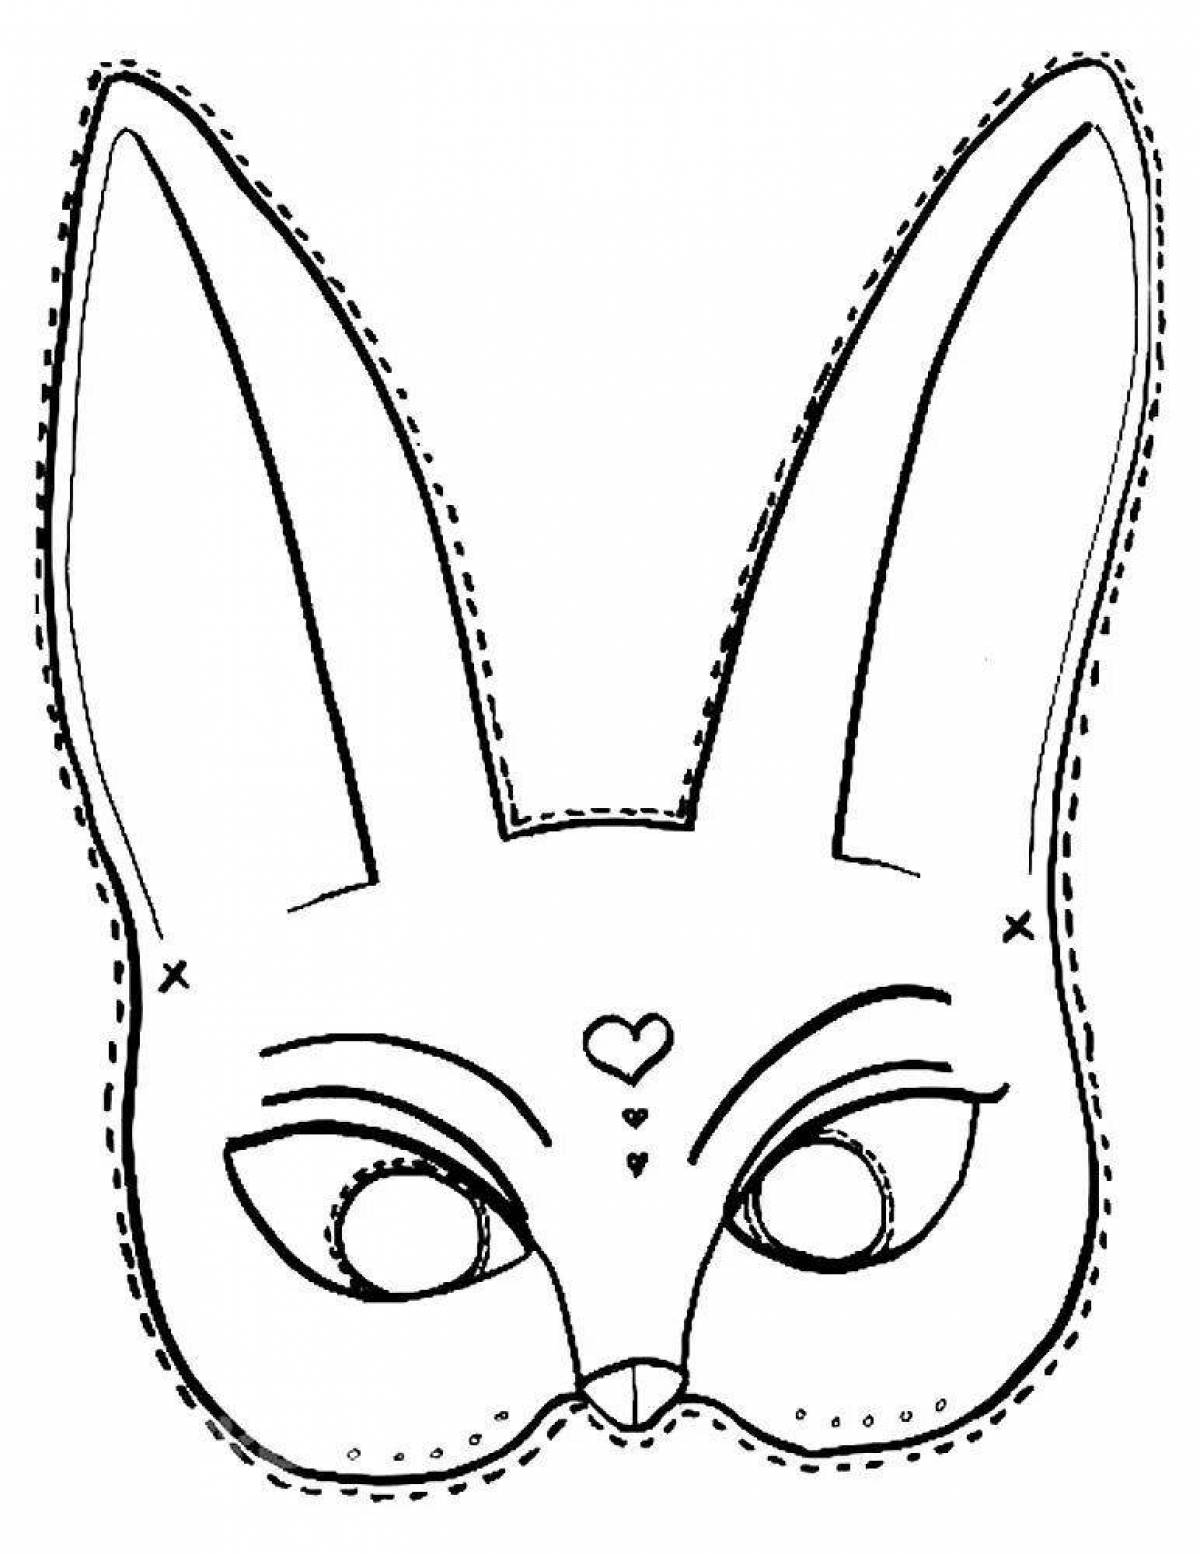 Exciting masked coloring pages for kids